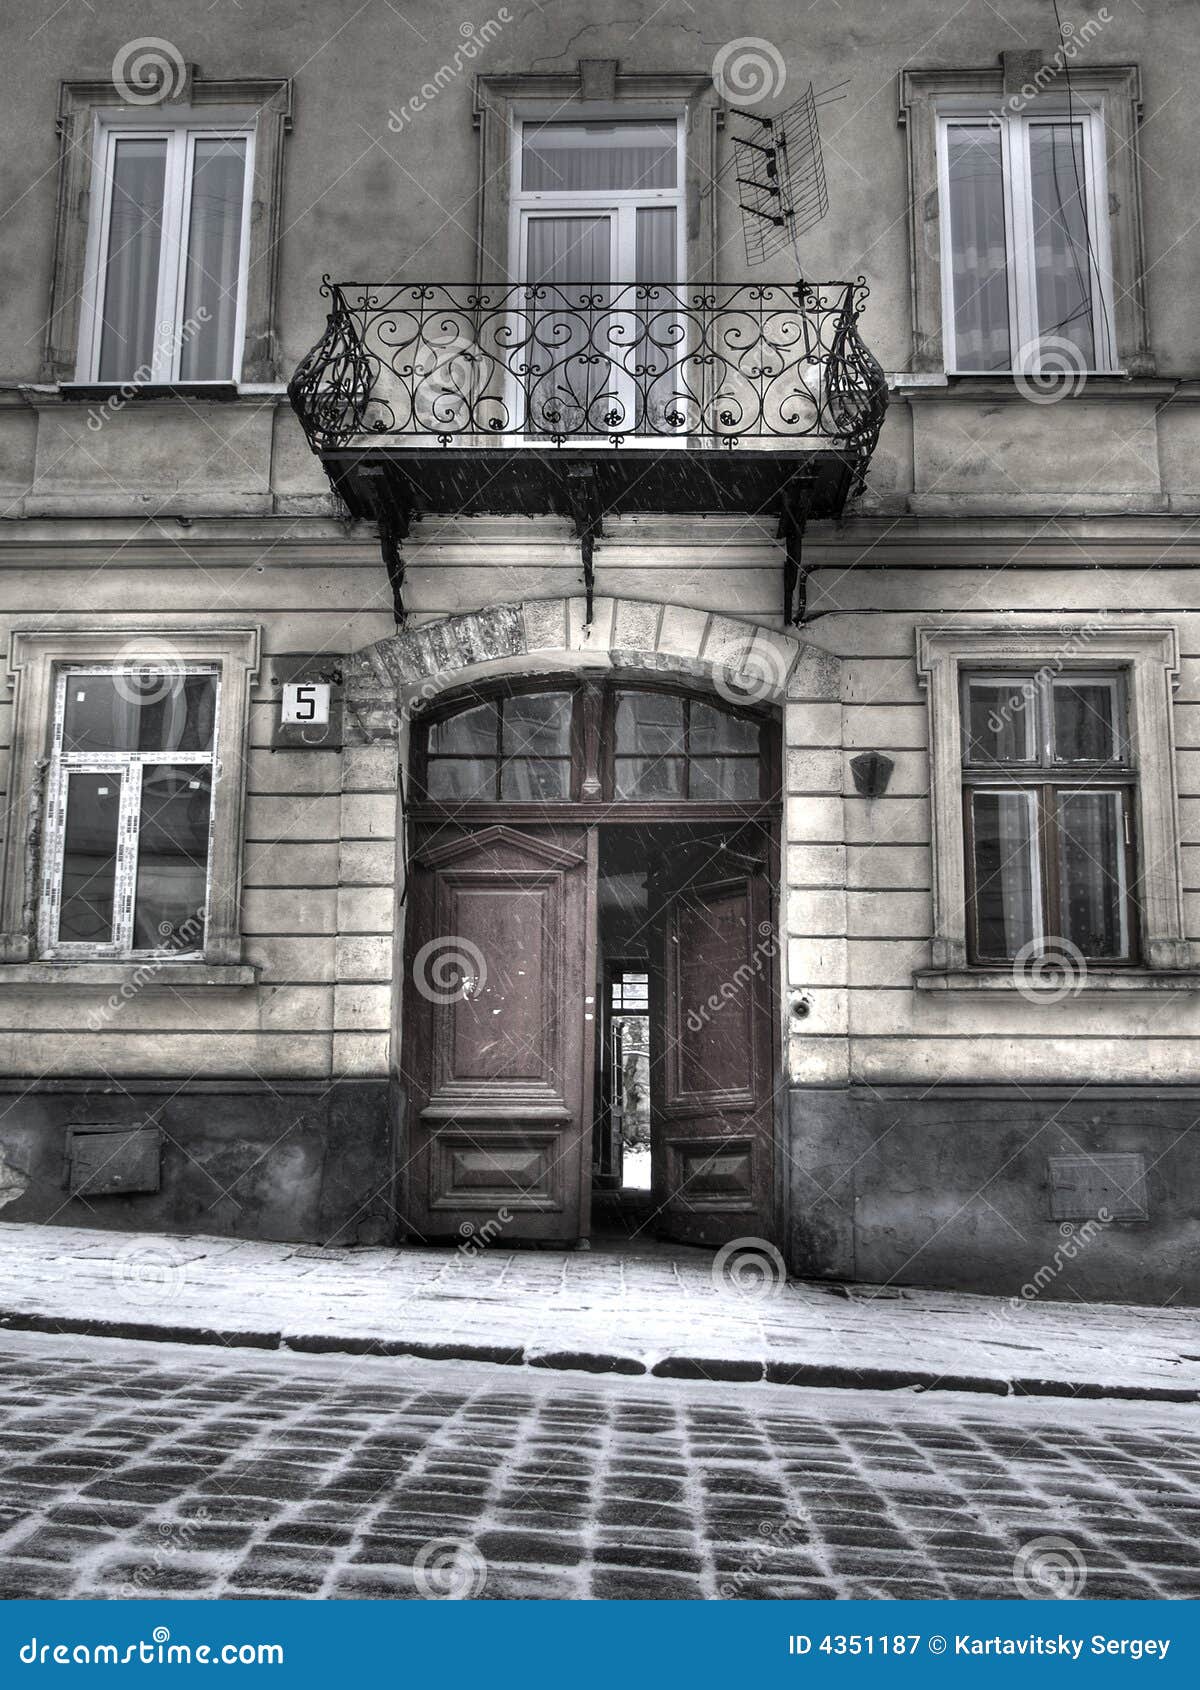 this photo captures the doors of old lviv